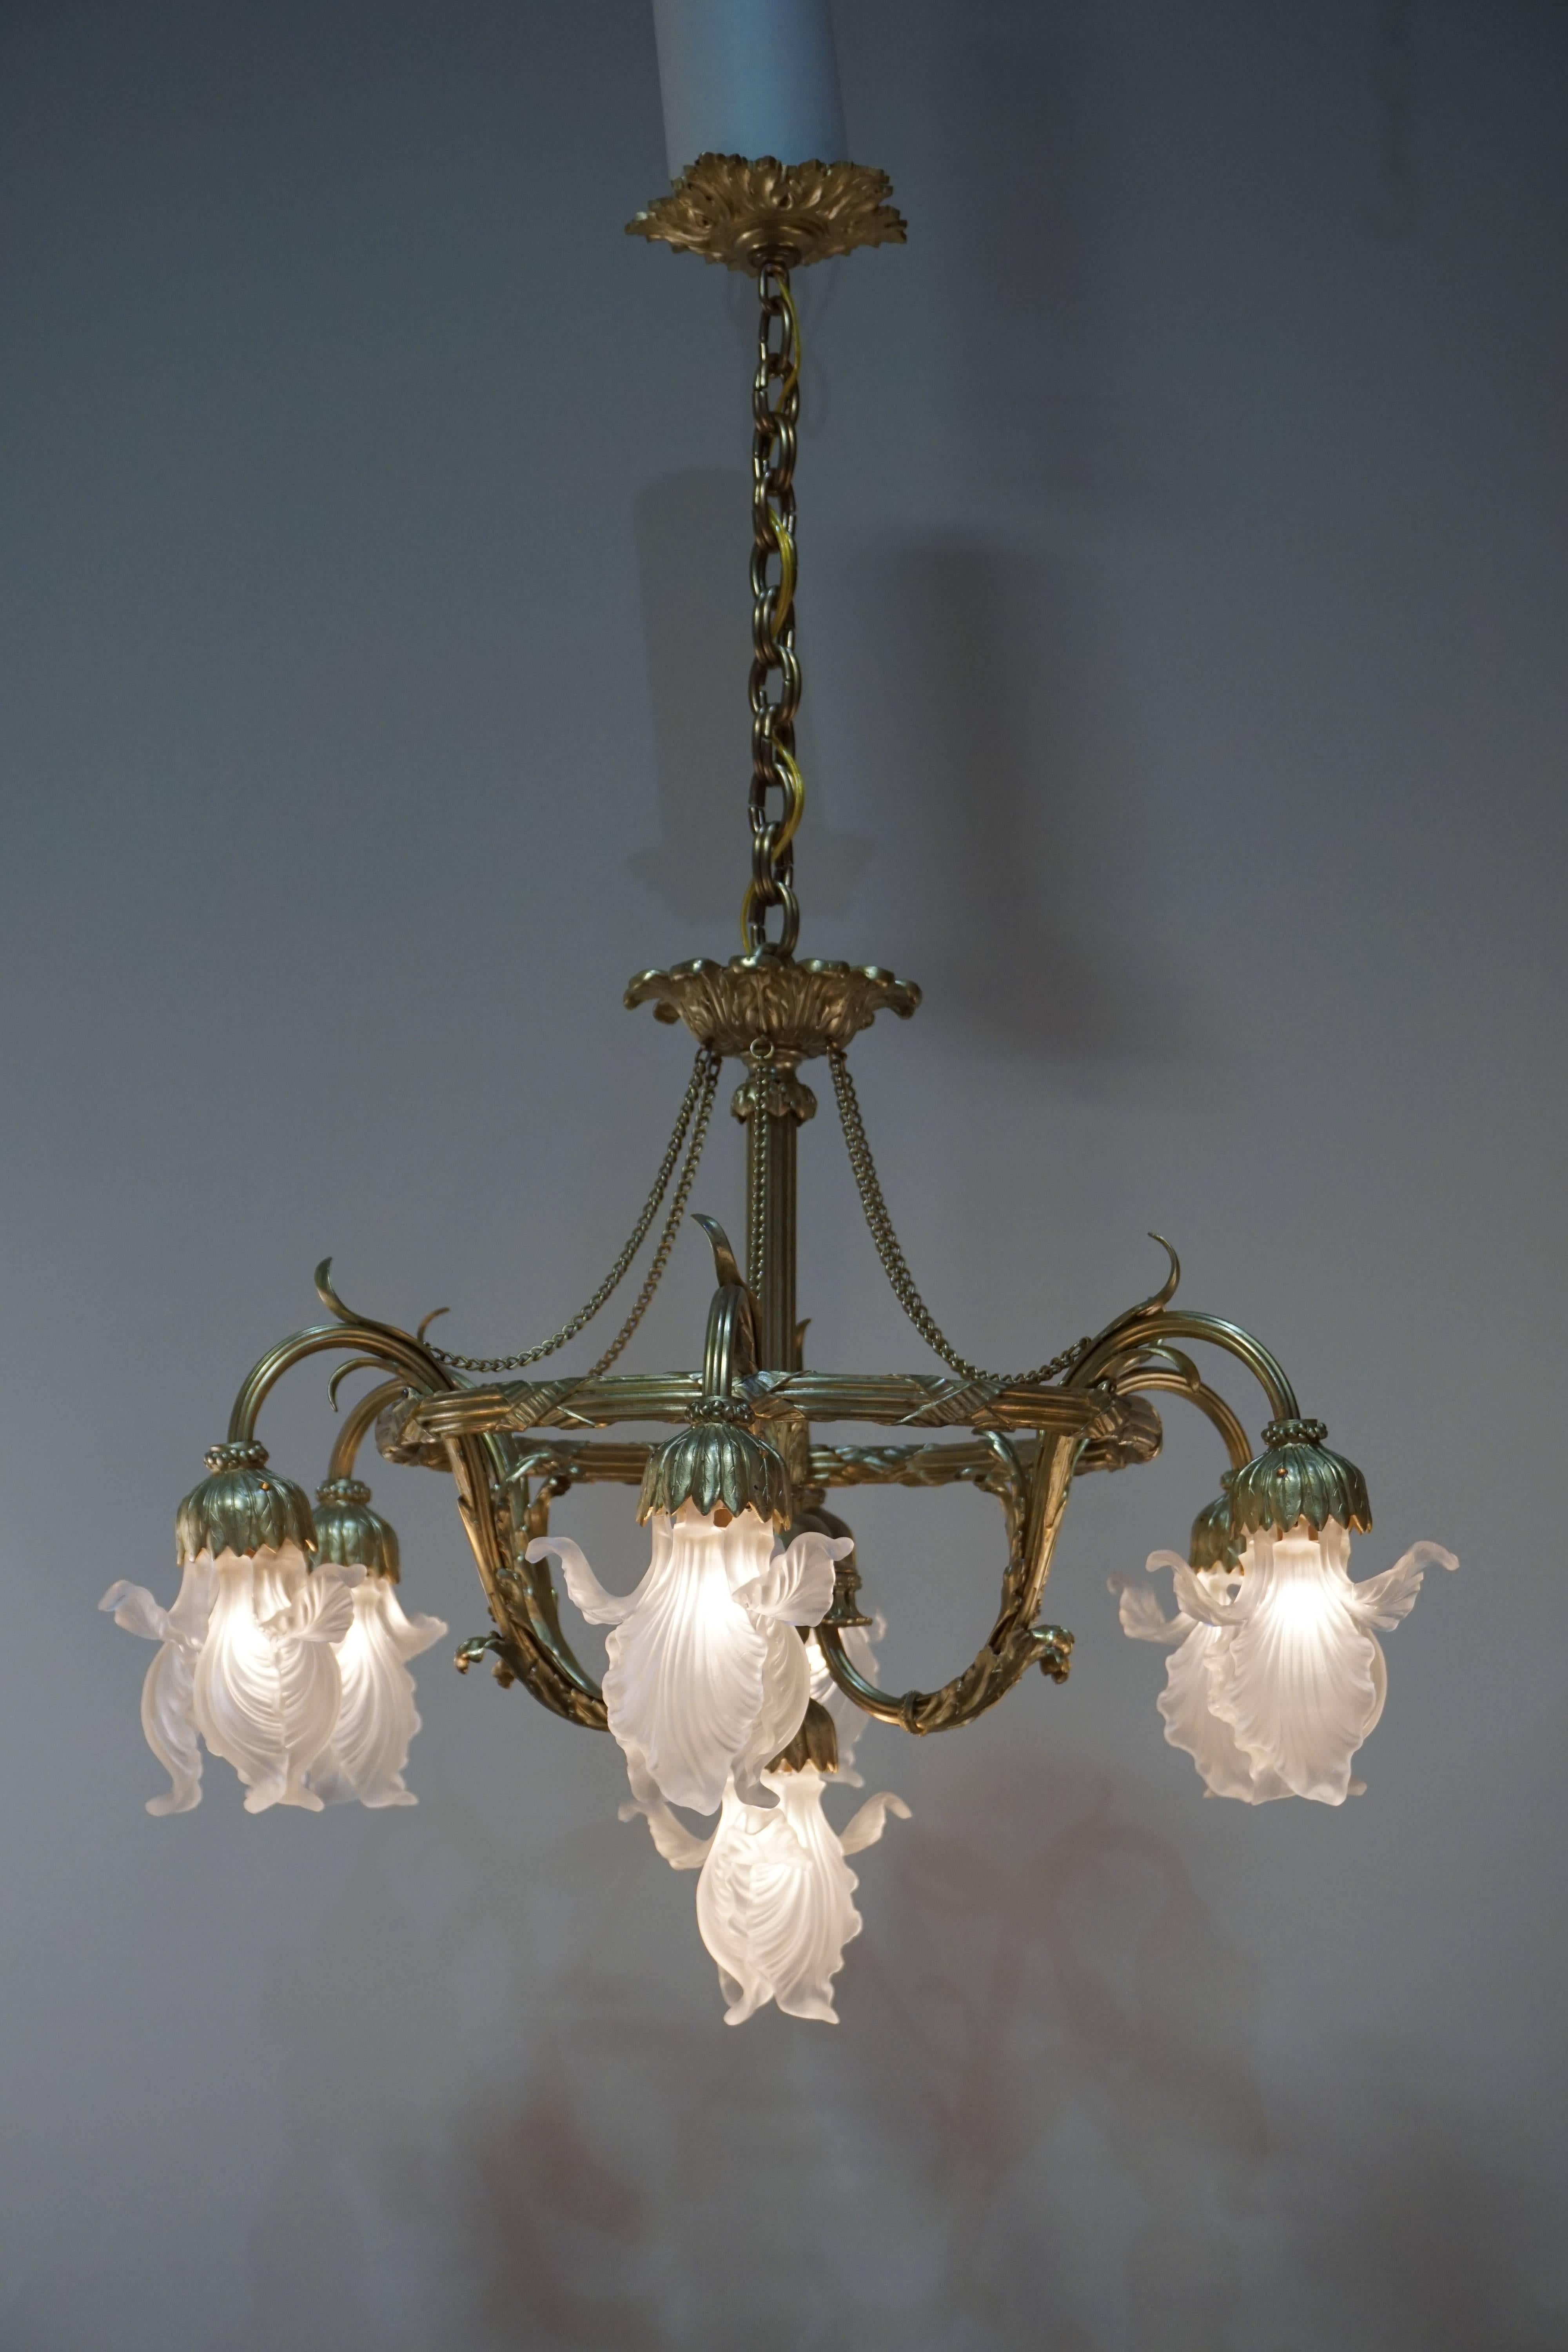 Elegant seven light bronze and Art Nouveau chandelier with six part glass tulip shades. 
Total height is 39